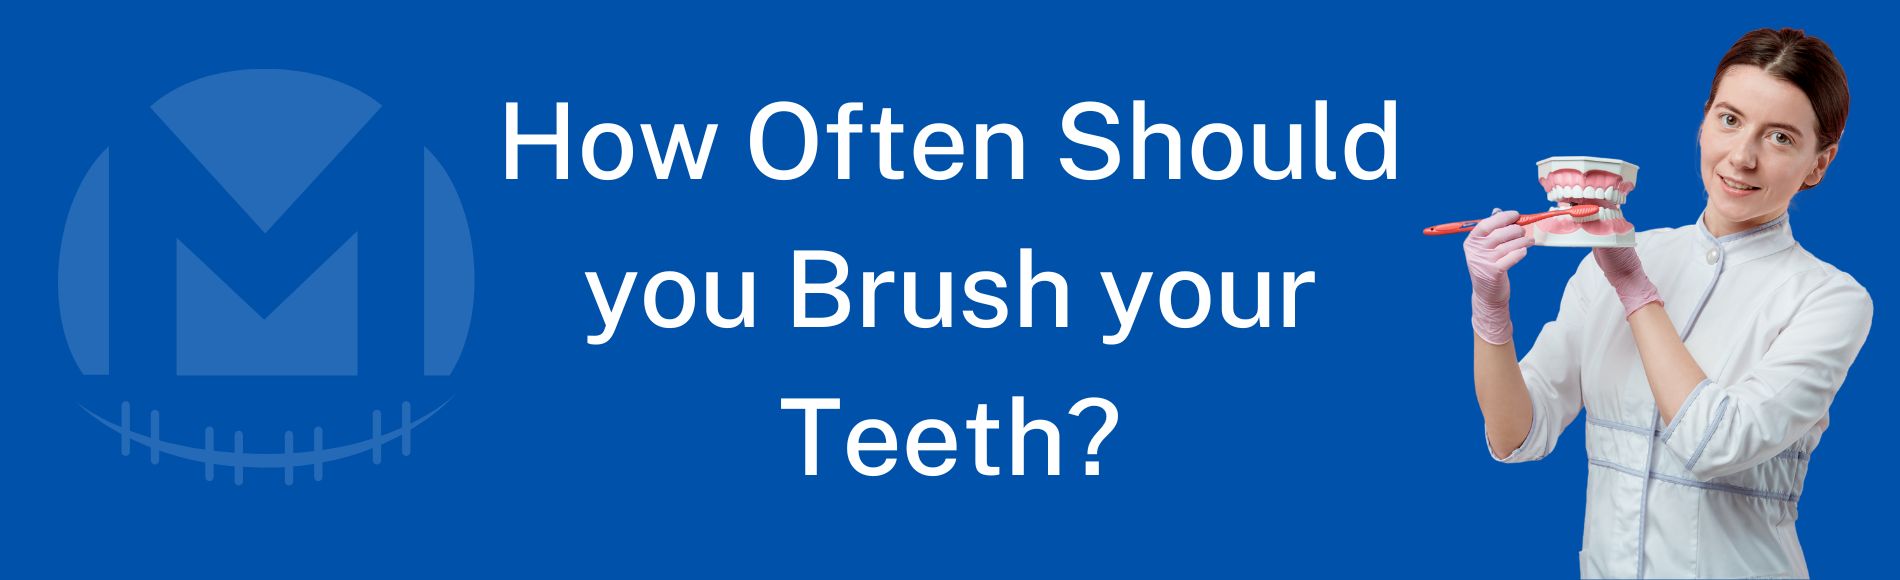 How Often Should you Brush your Teeth?